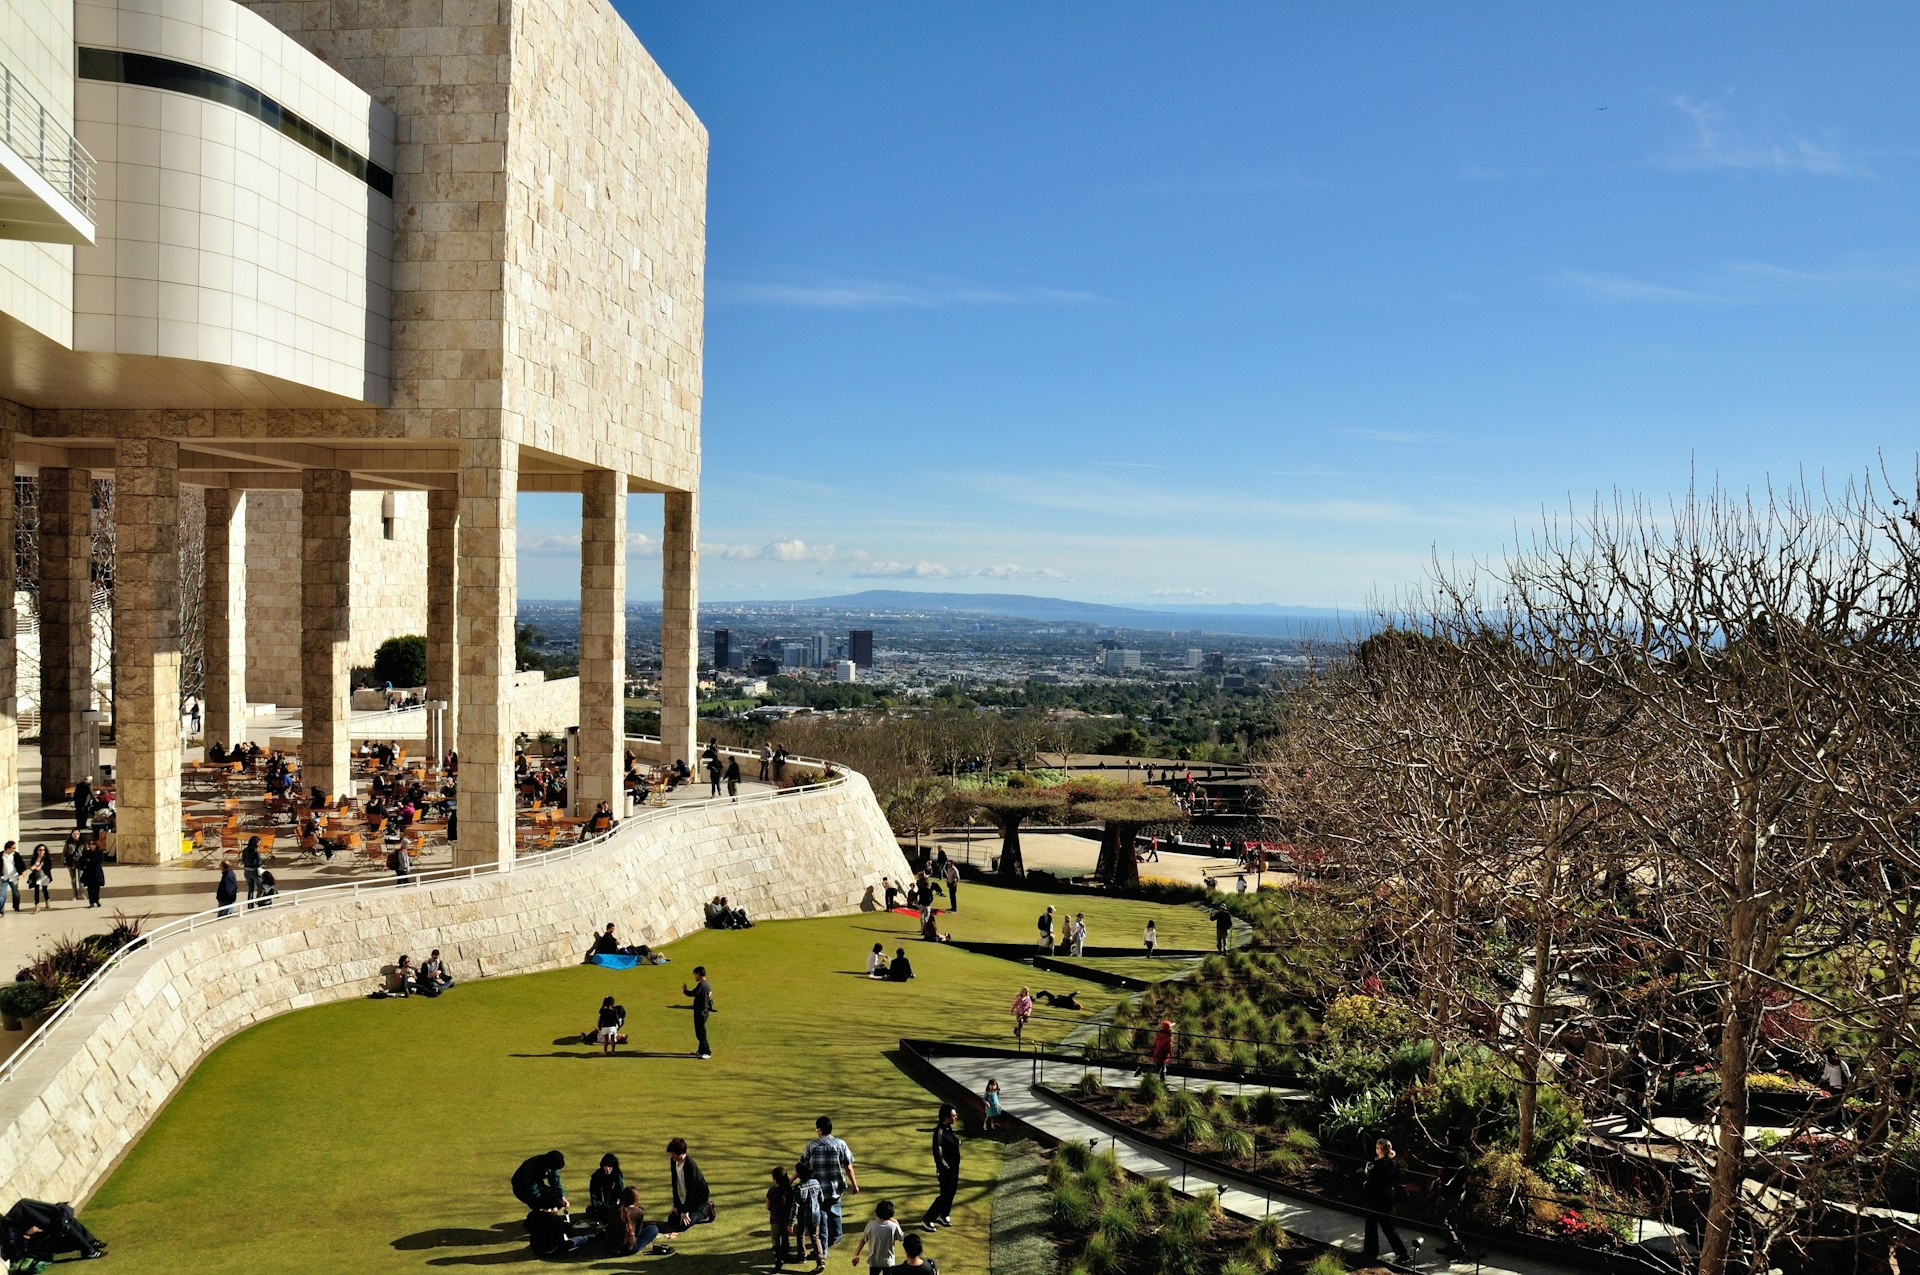 The exterior grounds of the Getty Center in Los Angeles